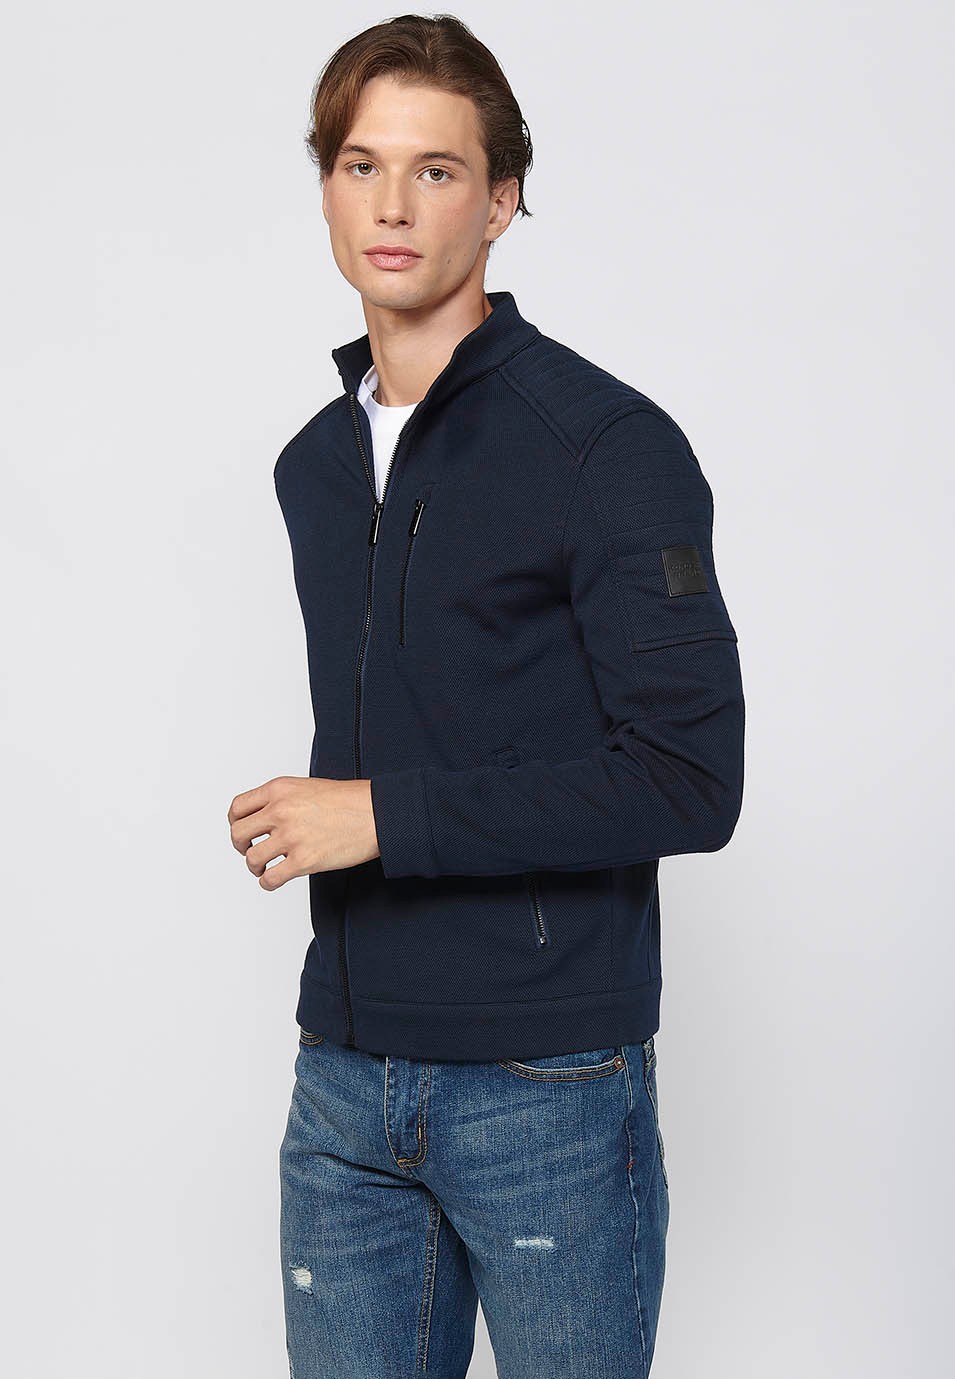 Navy Long Sleeve Jacket with Round Neck and Front Zipper Closure for Men